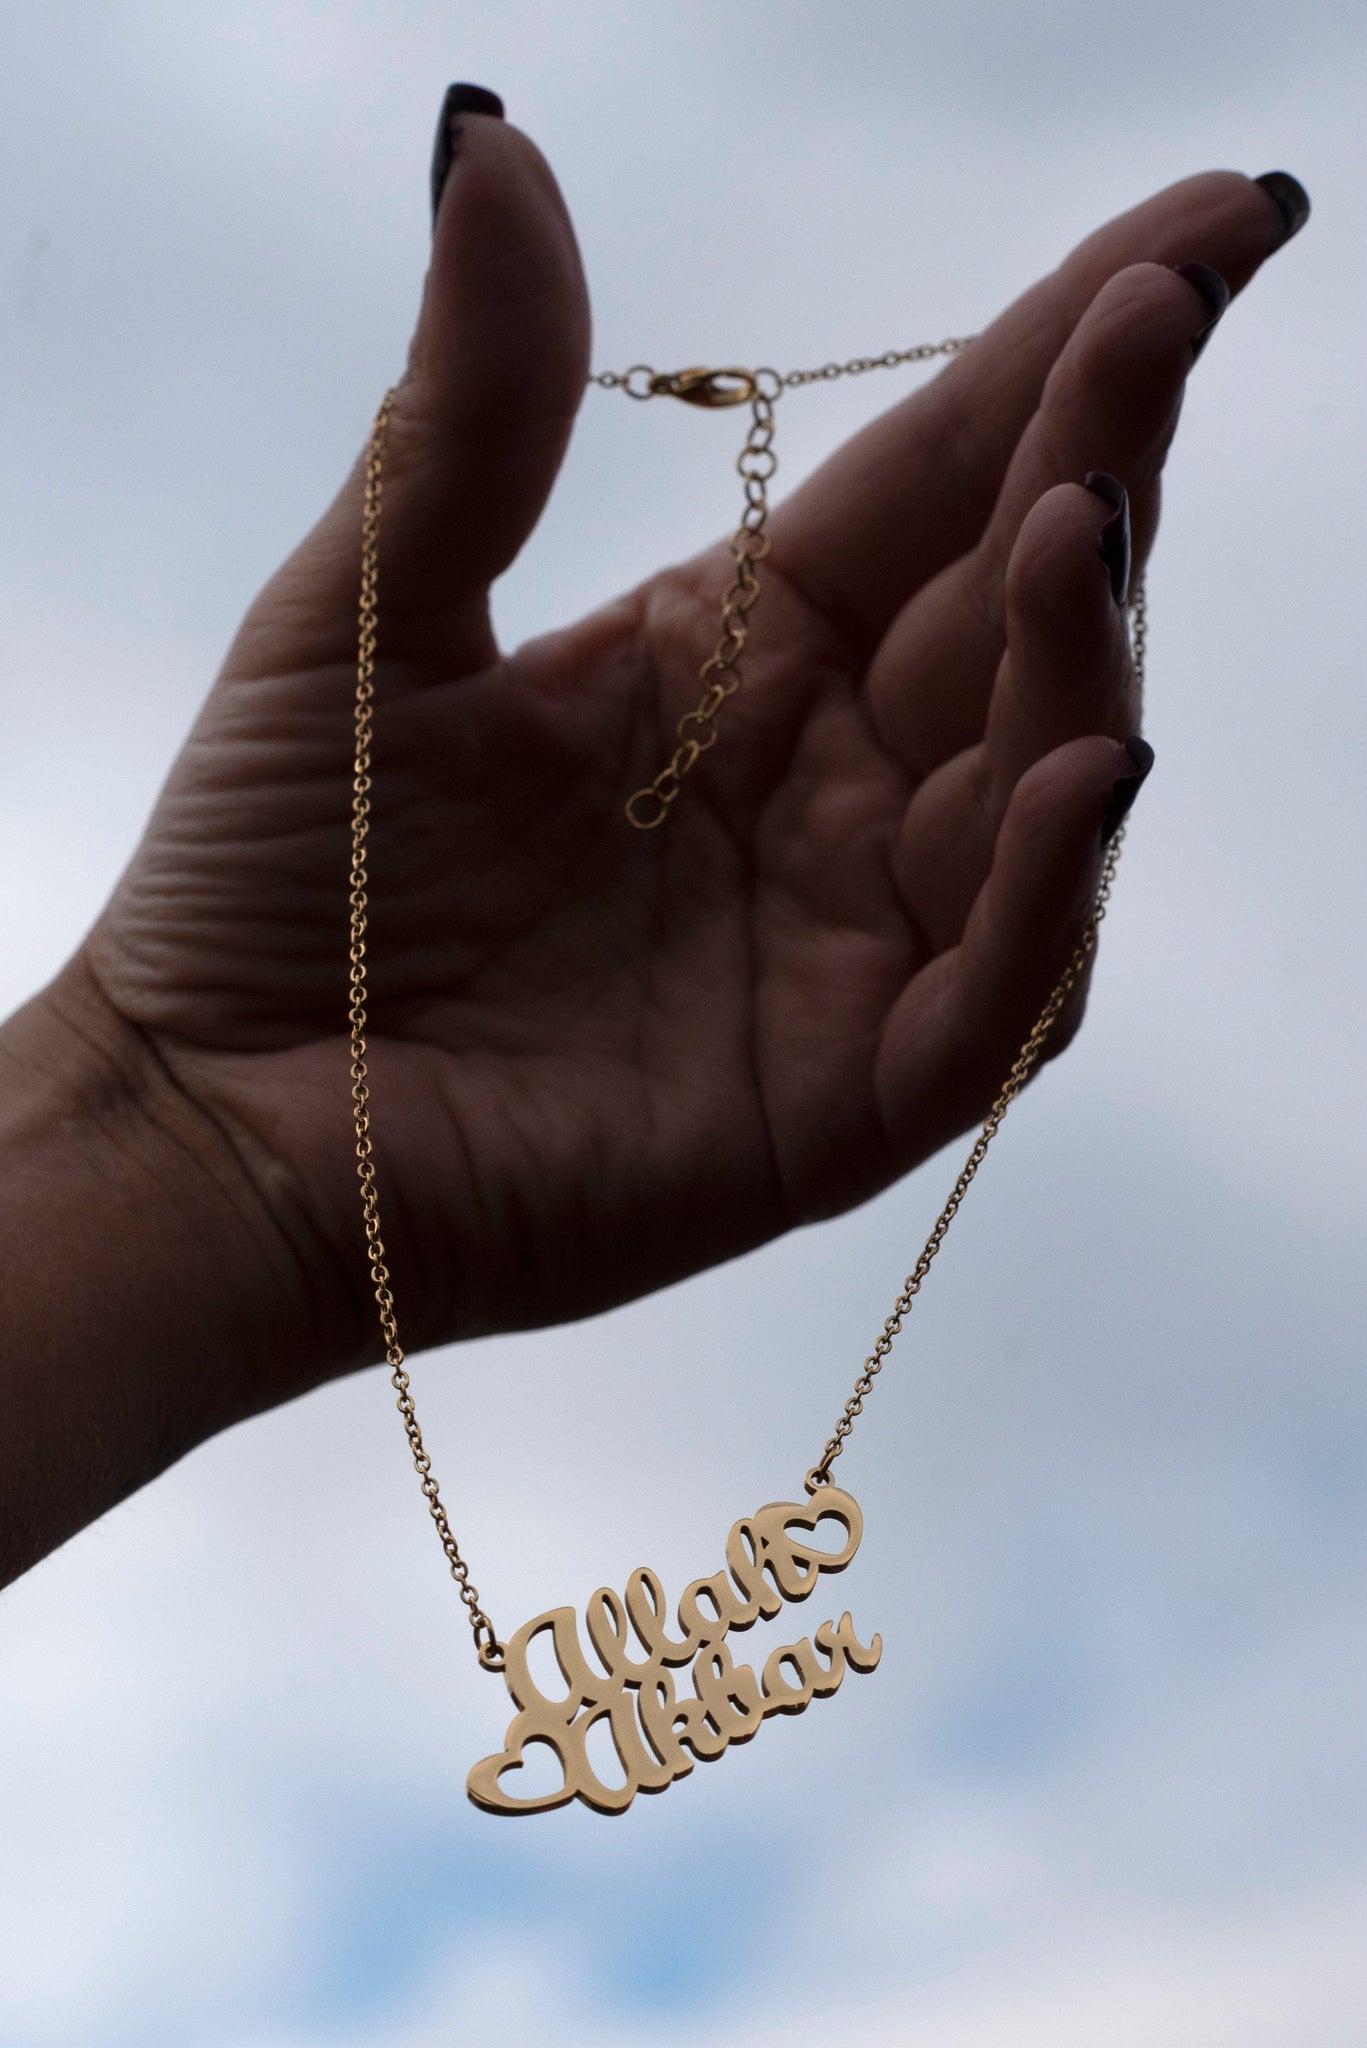 The Say It Loud and Say It Proud Allah Akbar Necklace